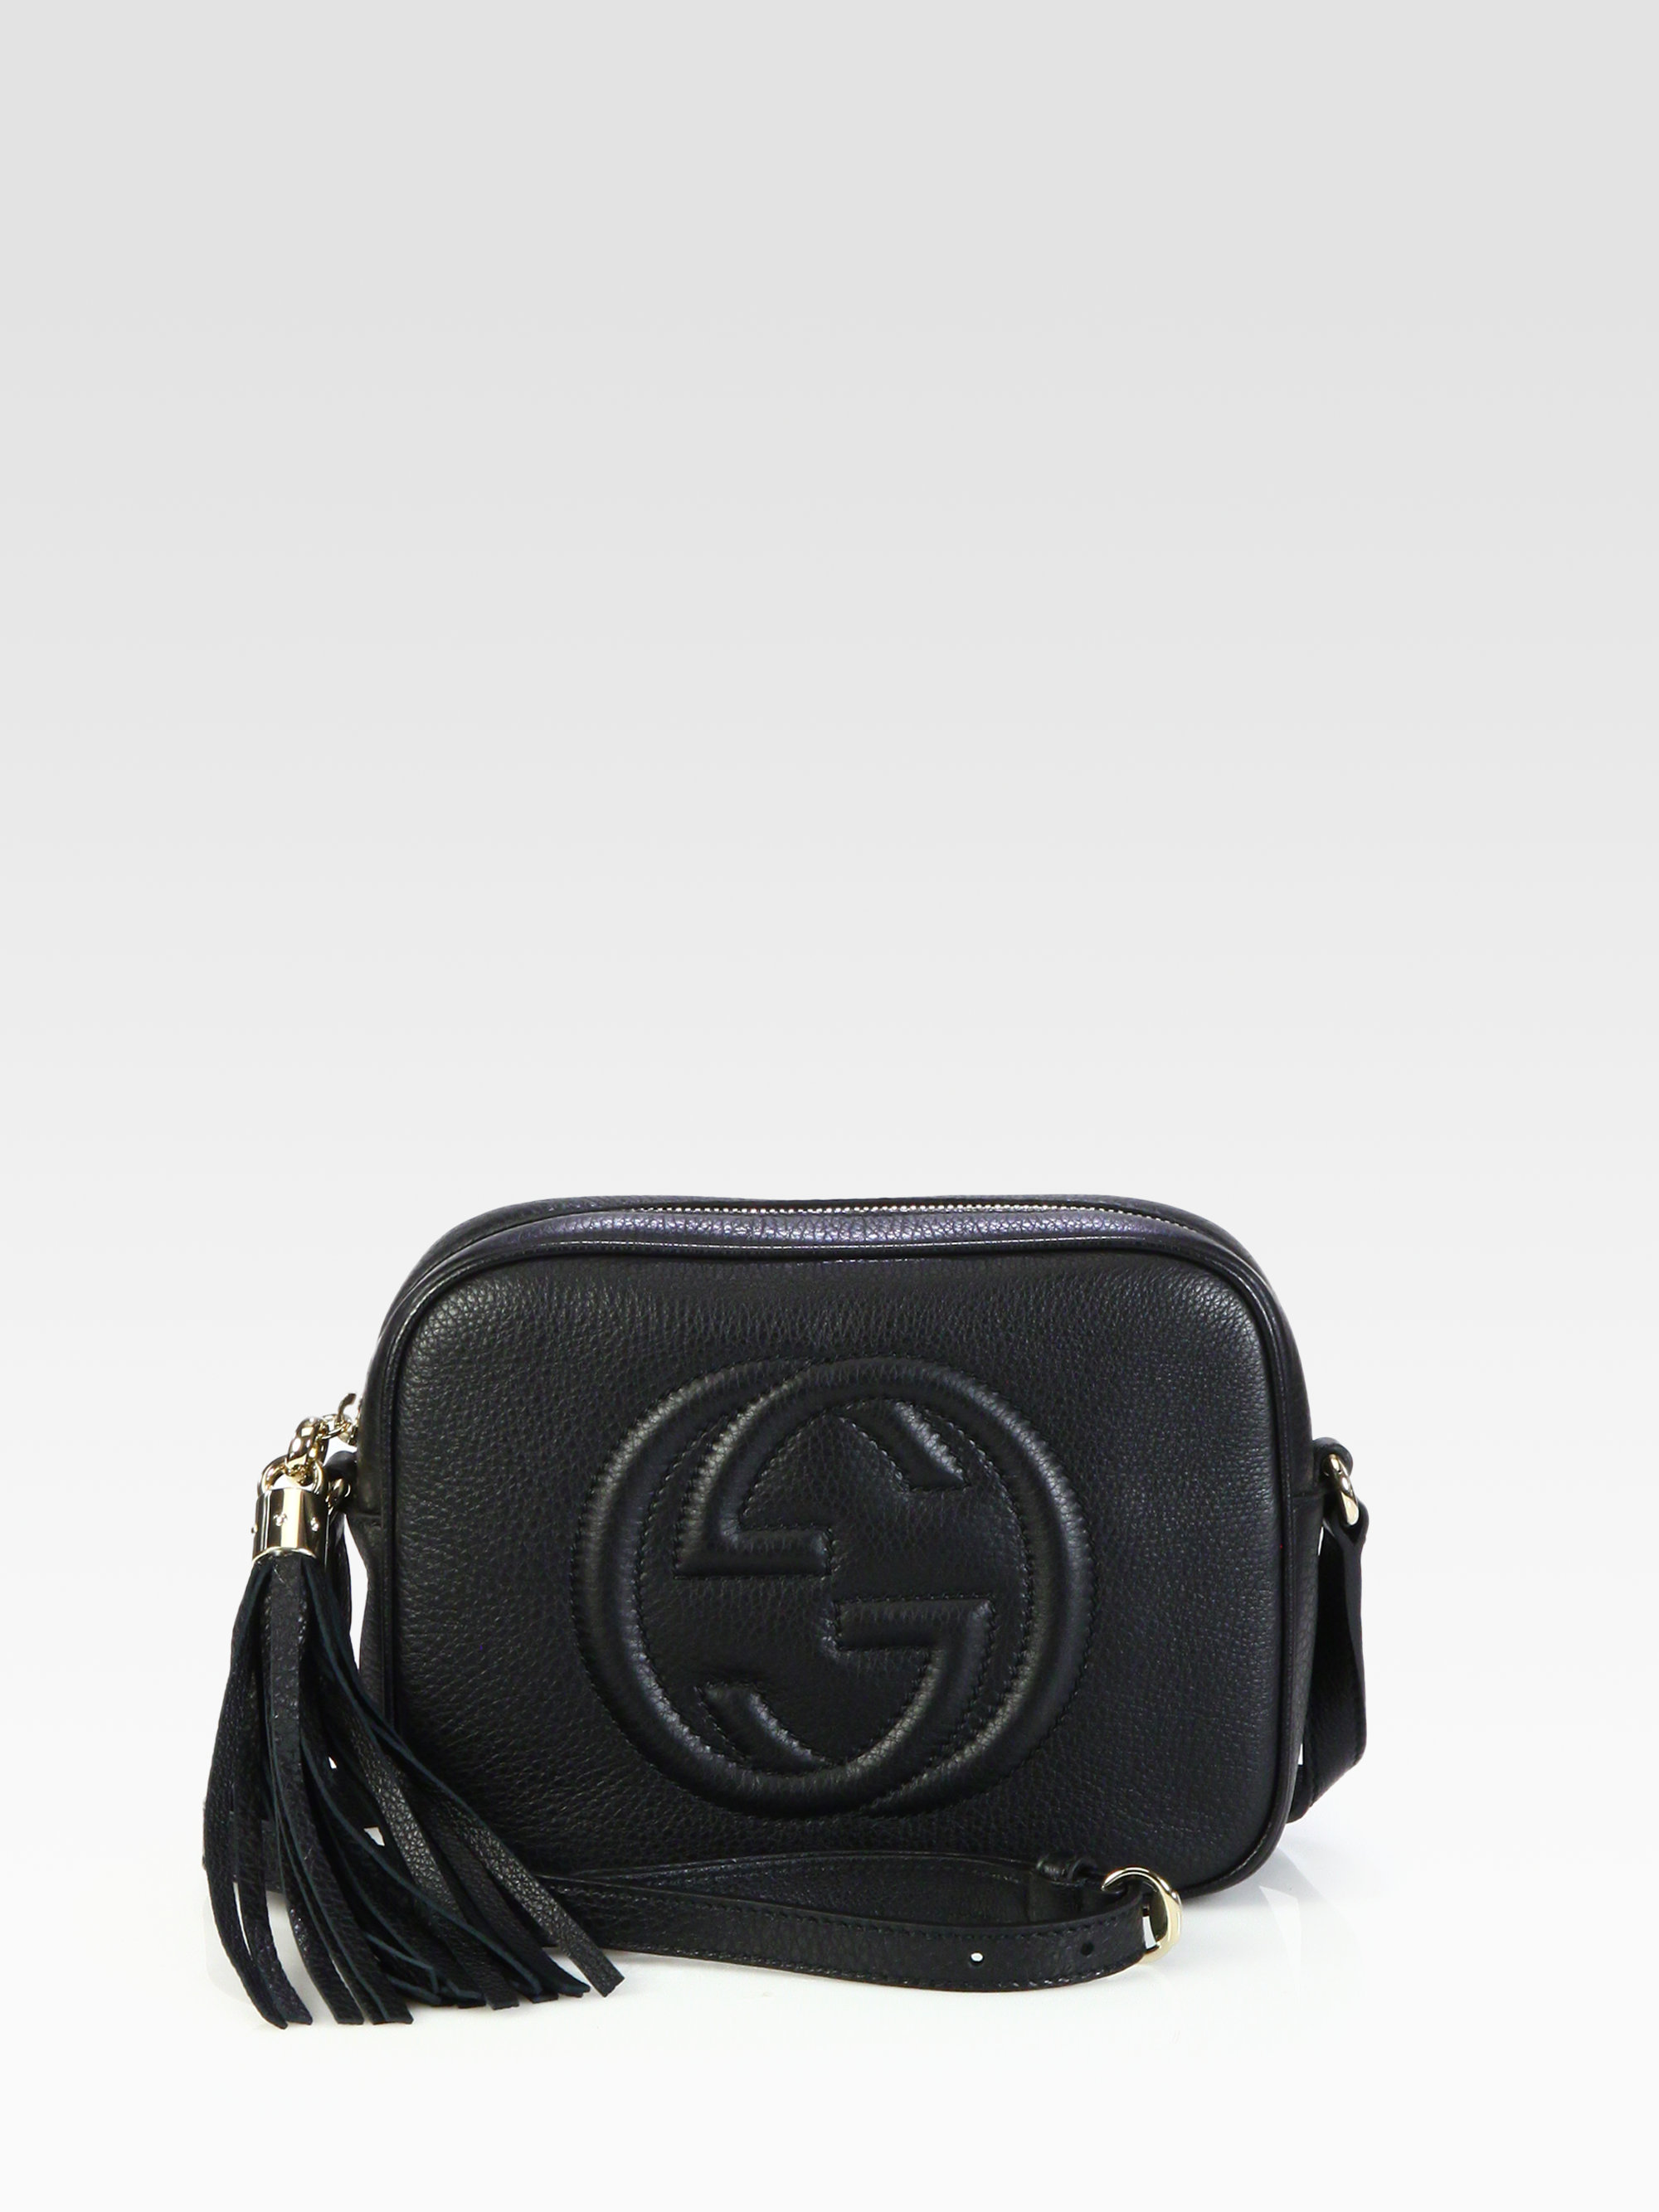 Gucci Soho Leather Disco Bag in Black | Lyst